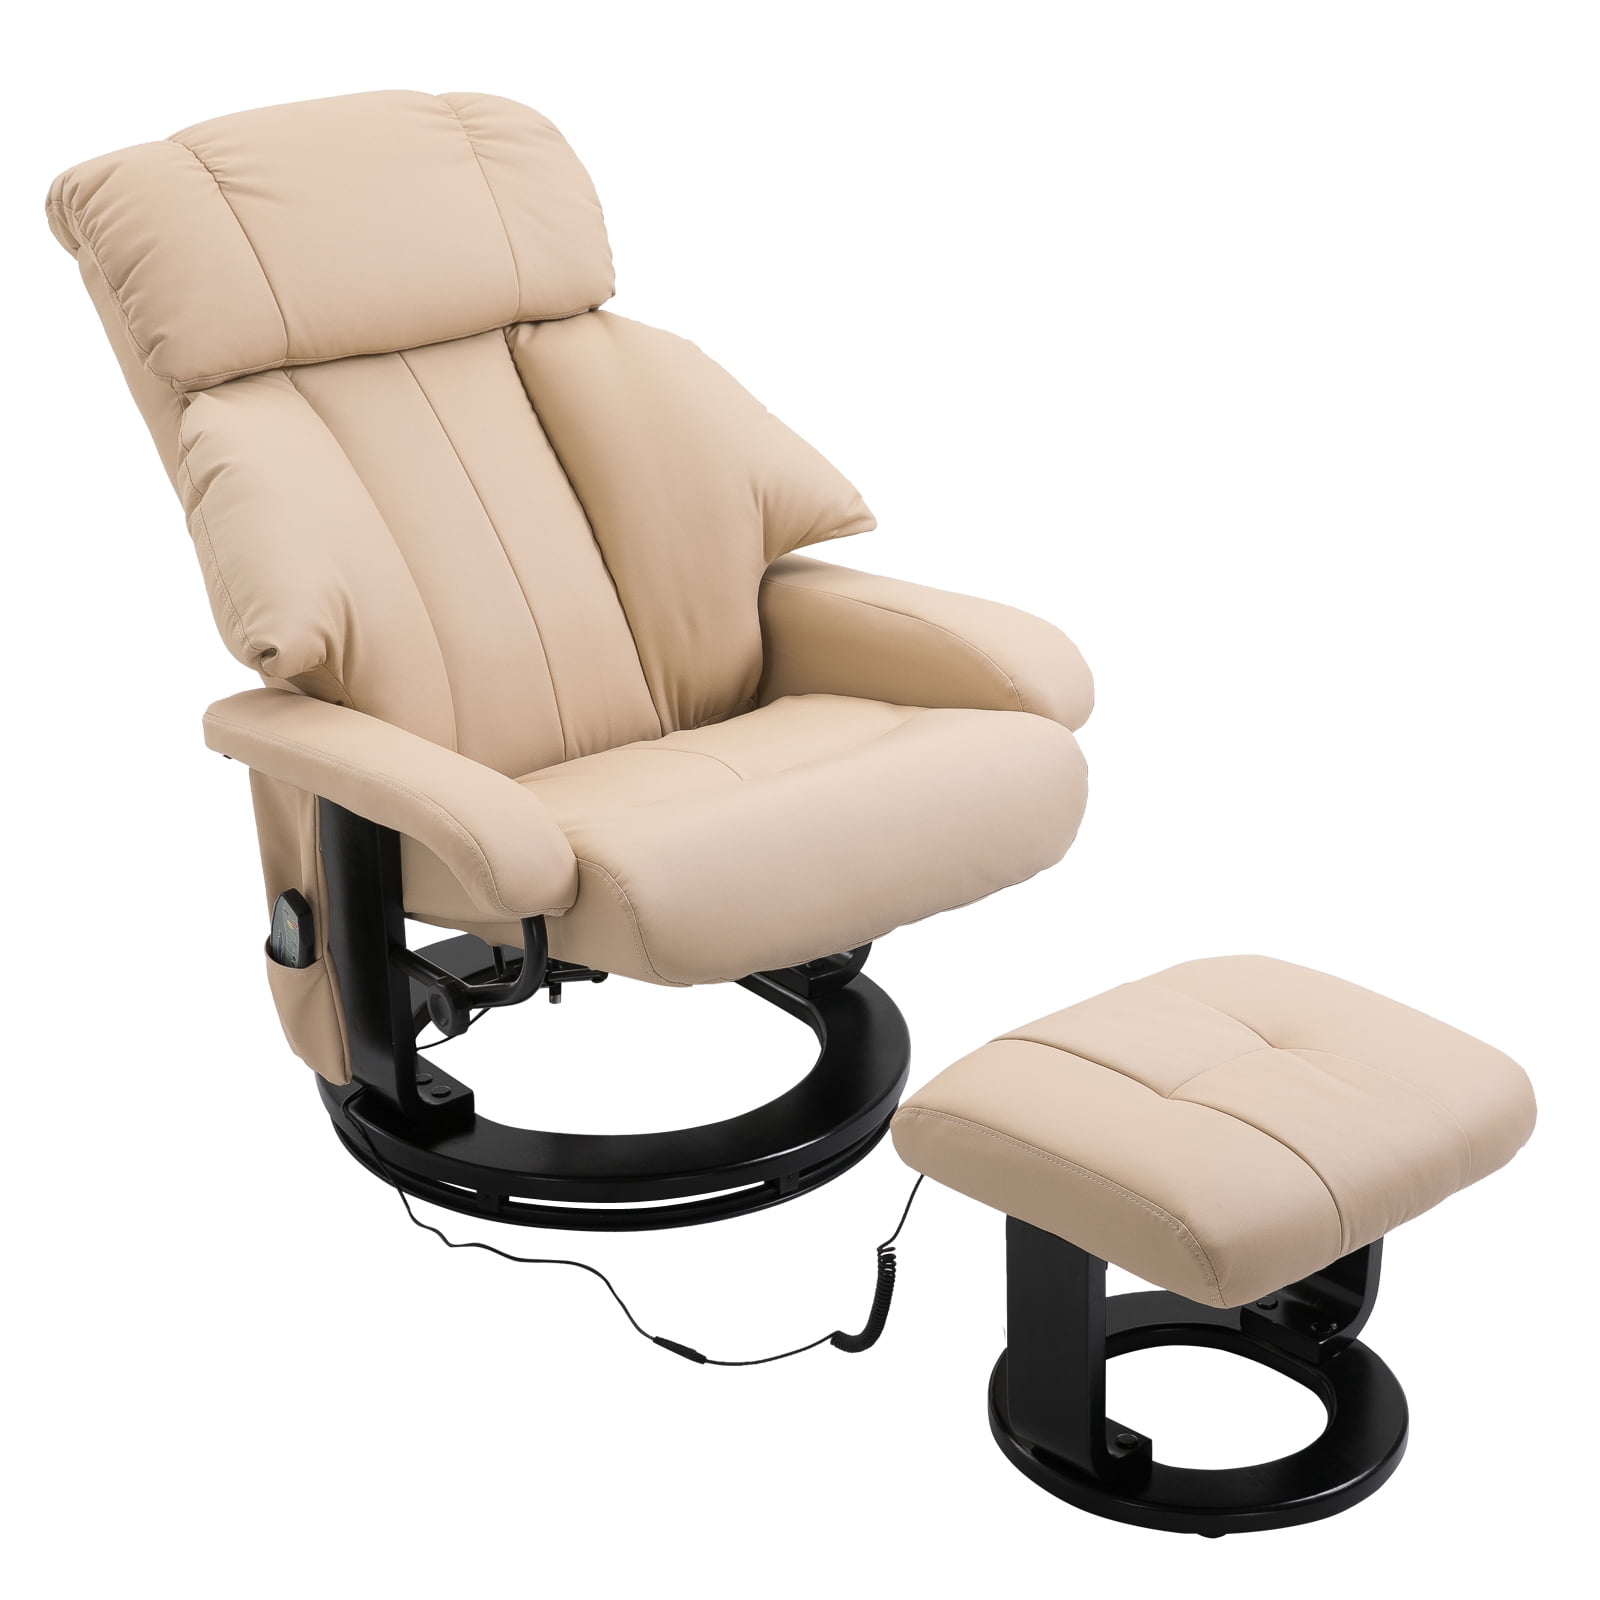 Leather Swivel Recliner With Ottoman